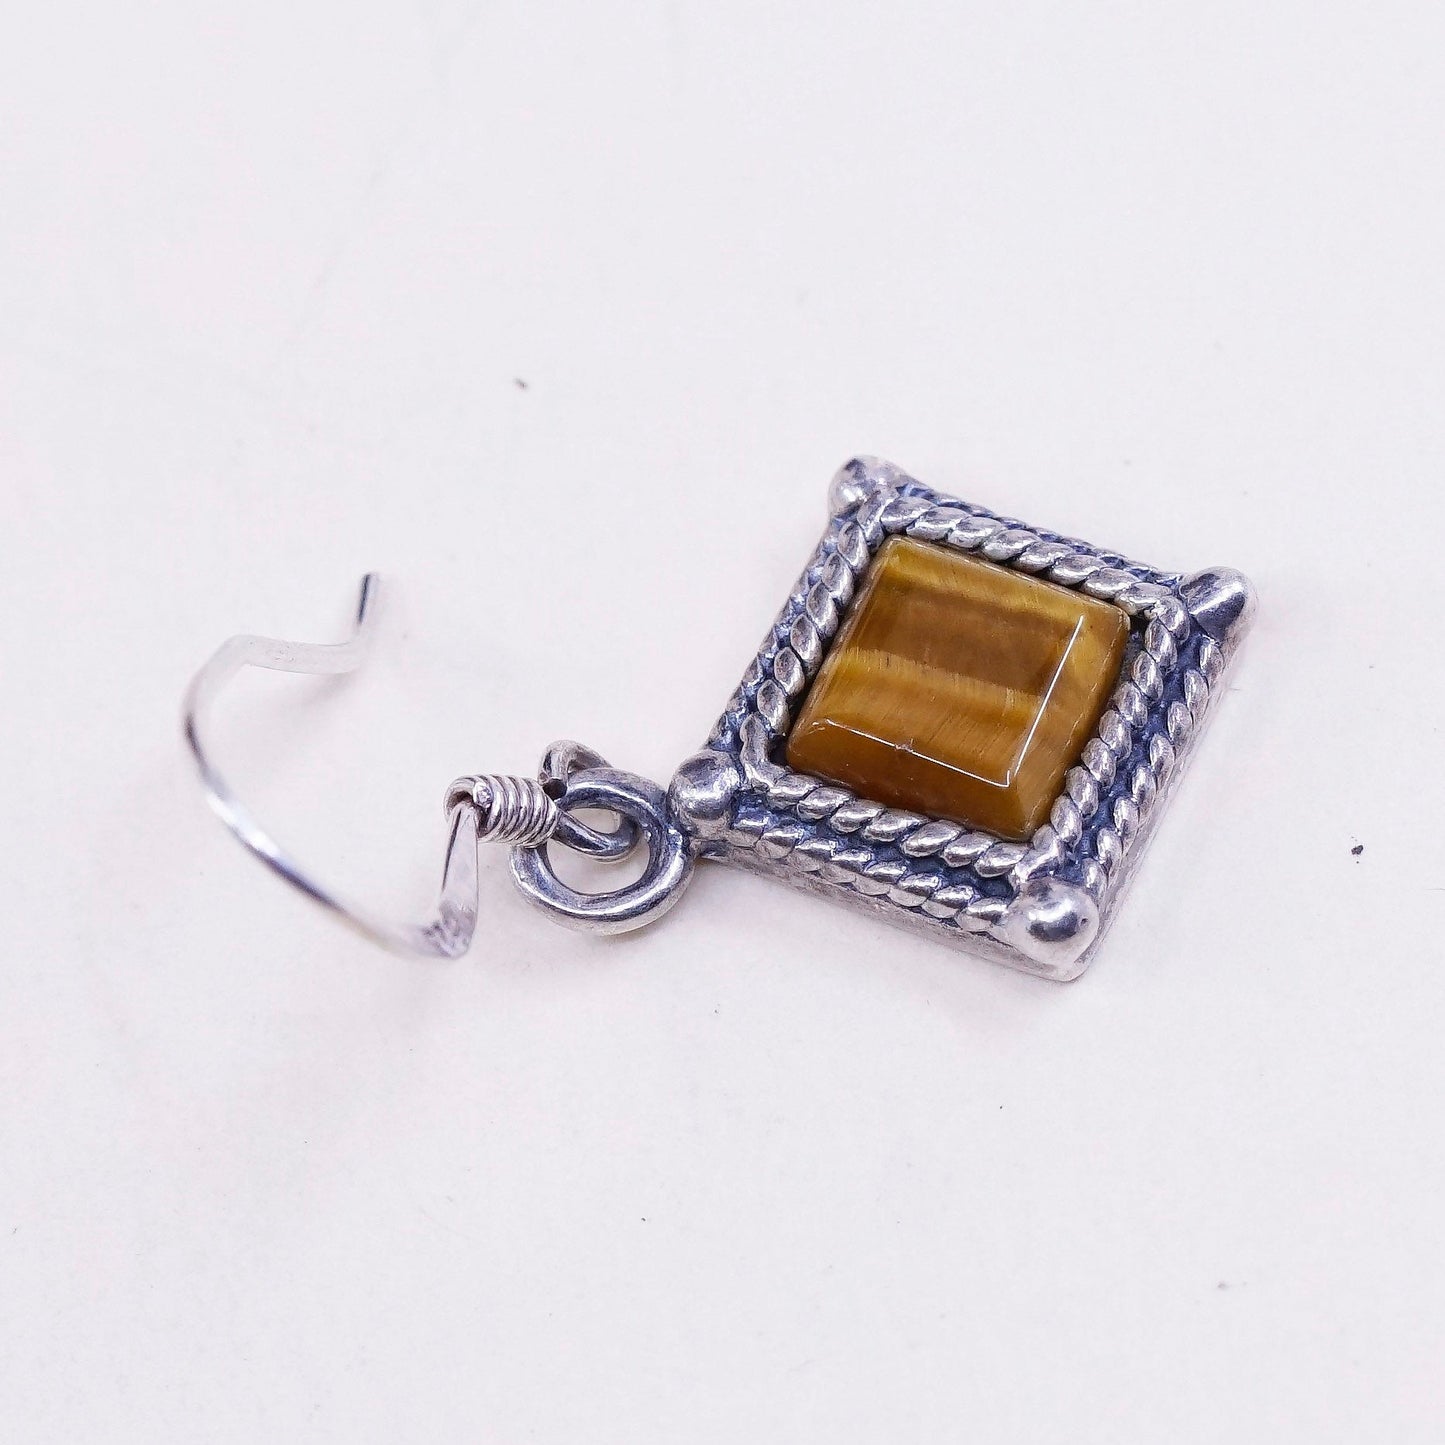 Vintage Sterling 925 silver handmade earrings with square tiger eye dangles